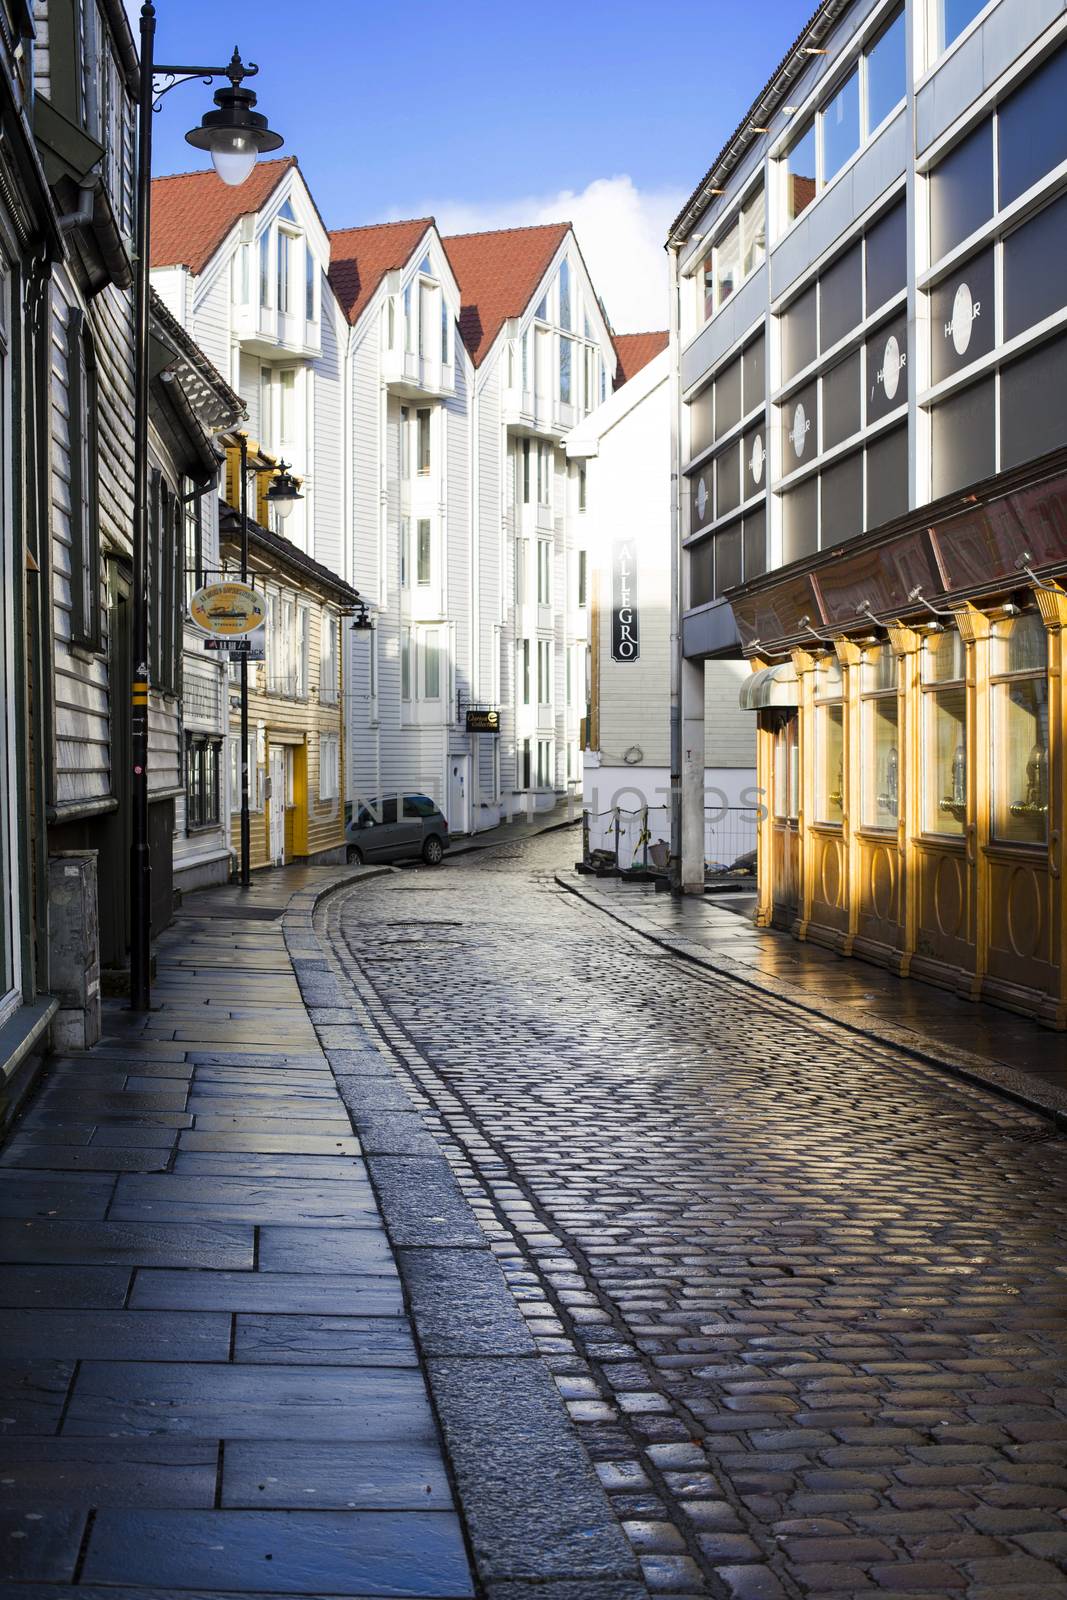 Typical Street in Old Stavanger Norway with Modern and Old Style by Whiteboxmedia